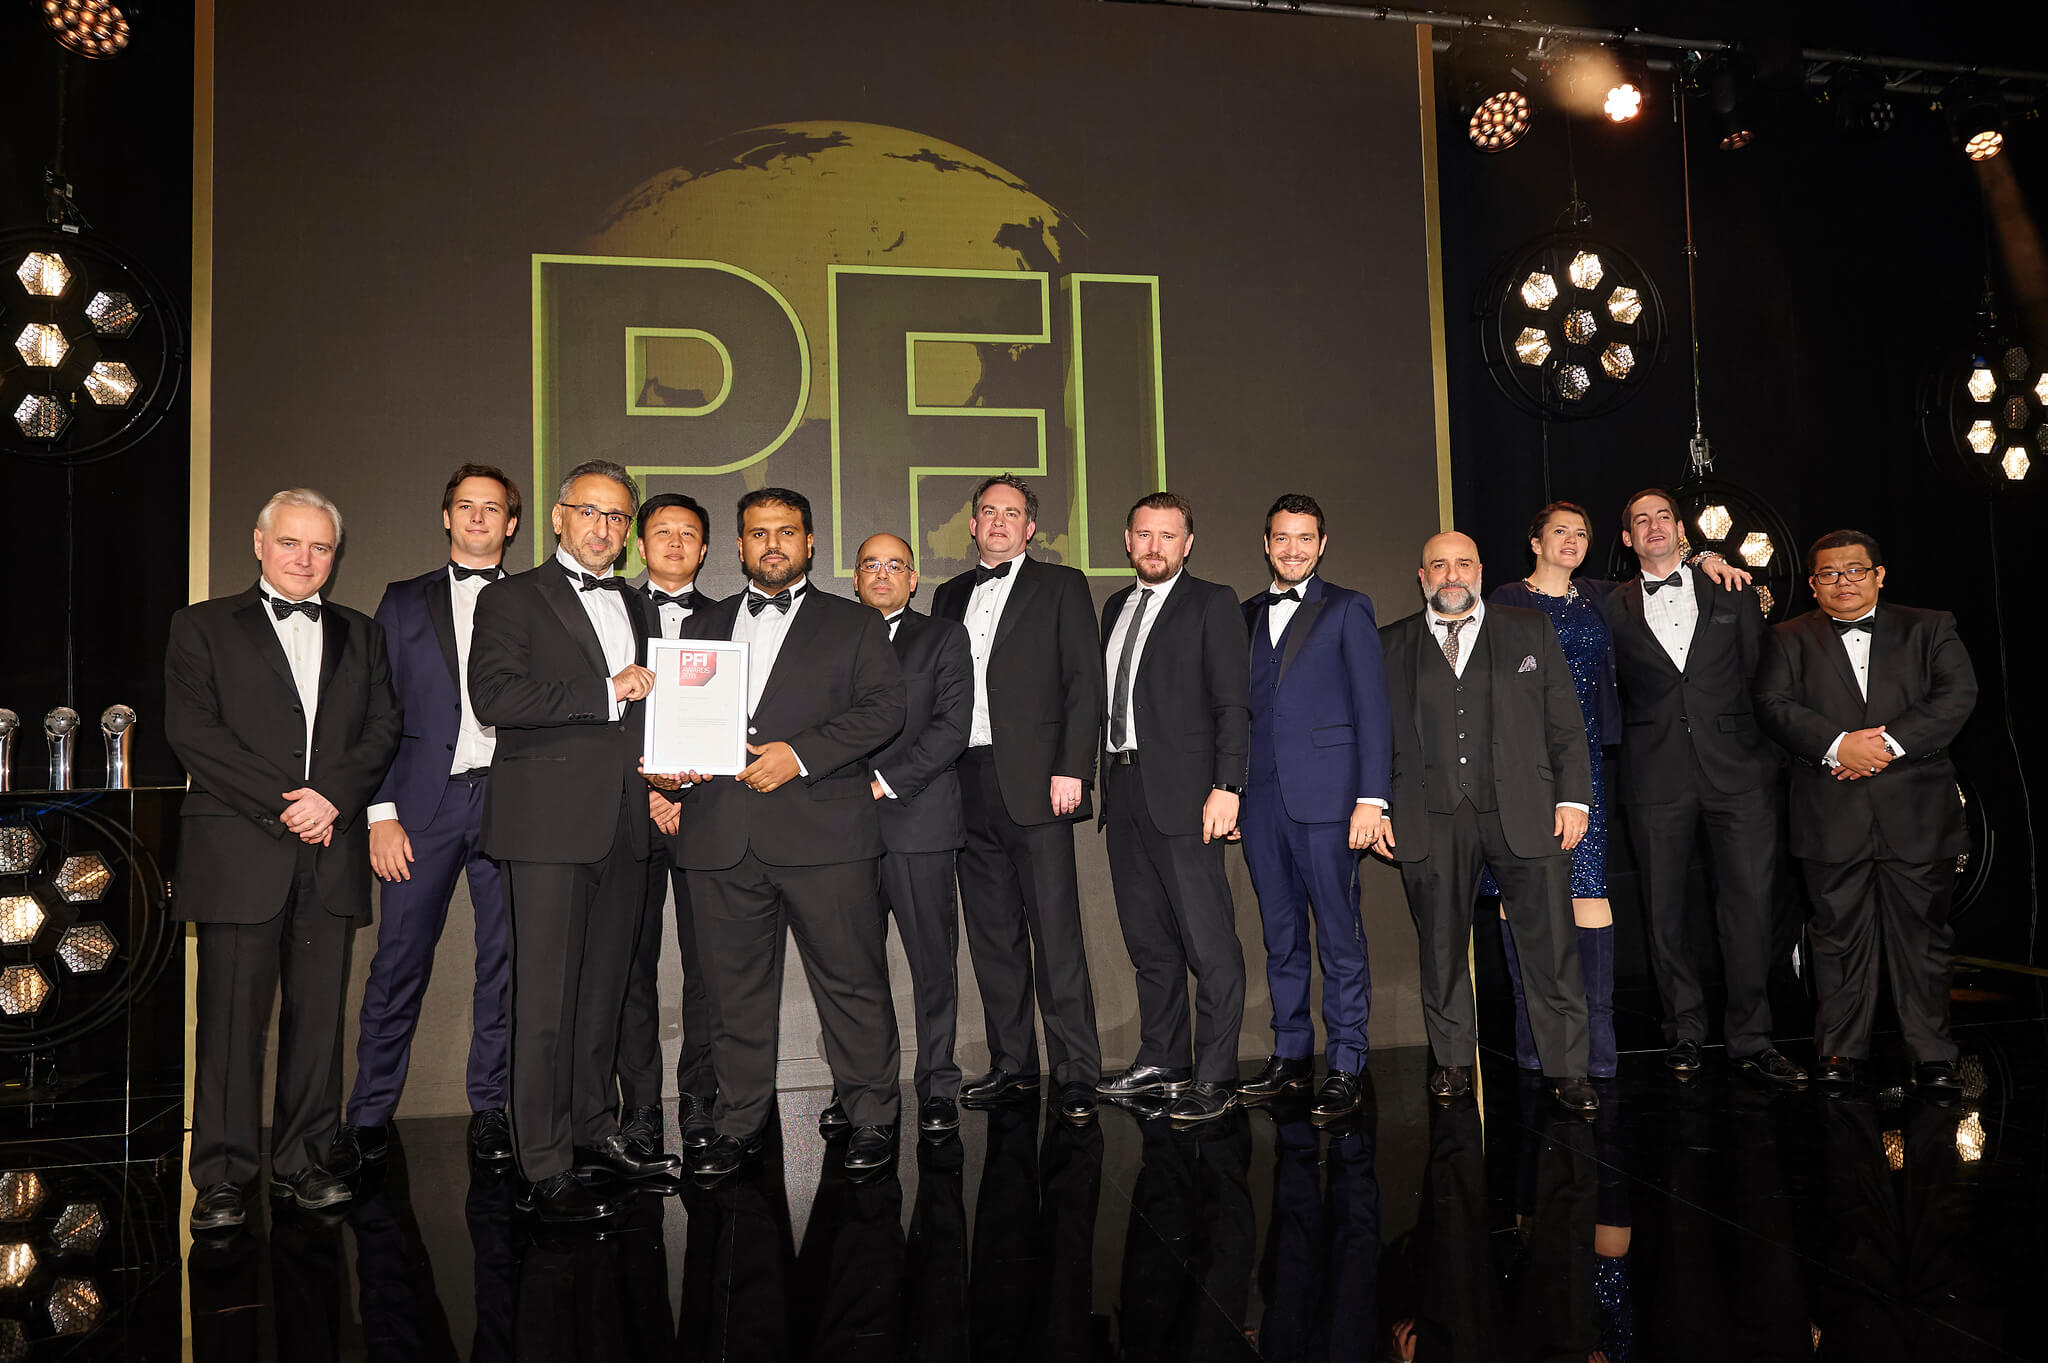 UAE’s first waste-to-energy project recognized as Clean Energy Deal of the Year at the prestigious PFI Awards 2018